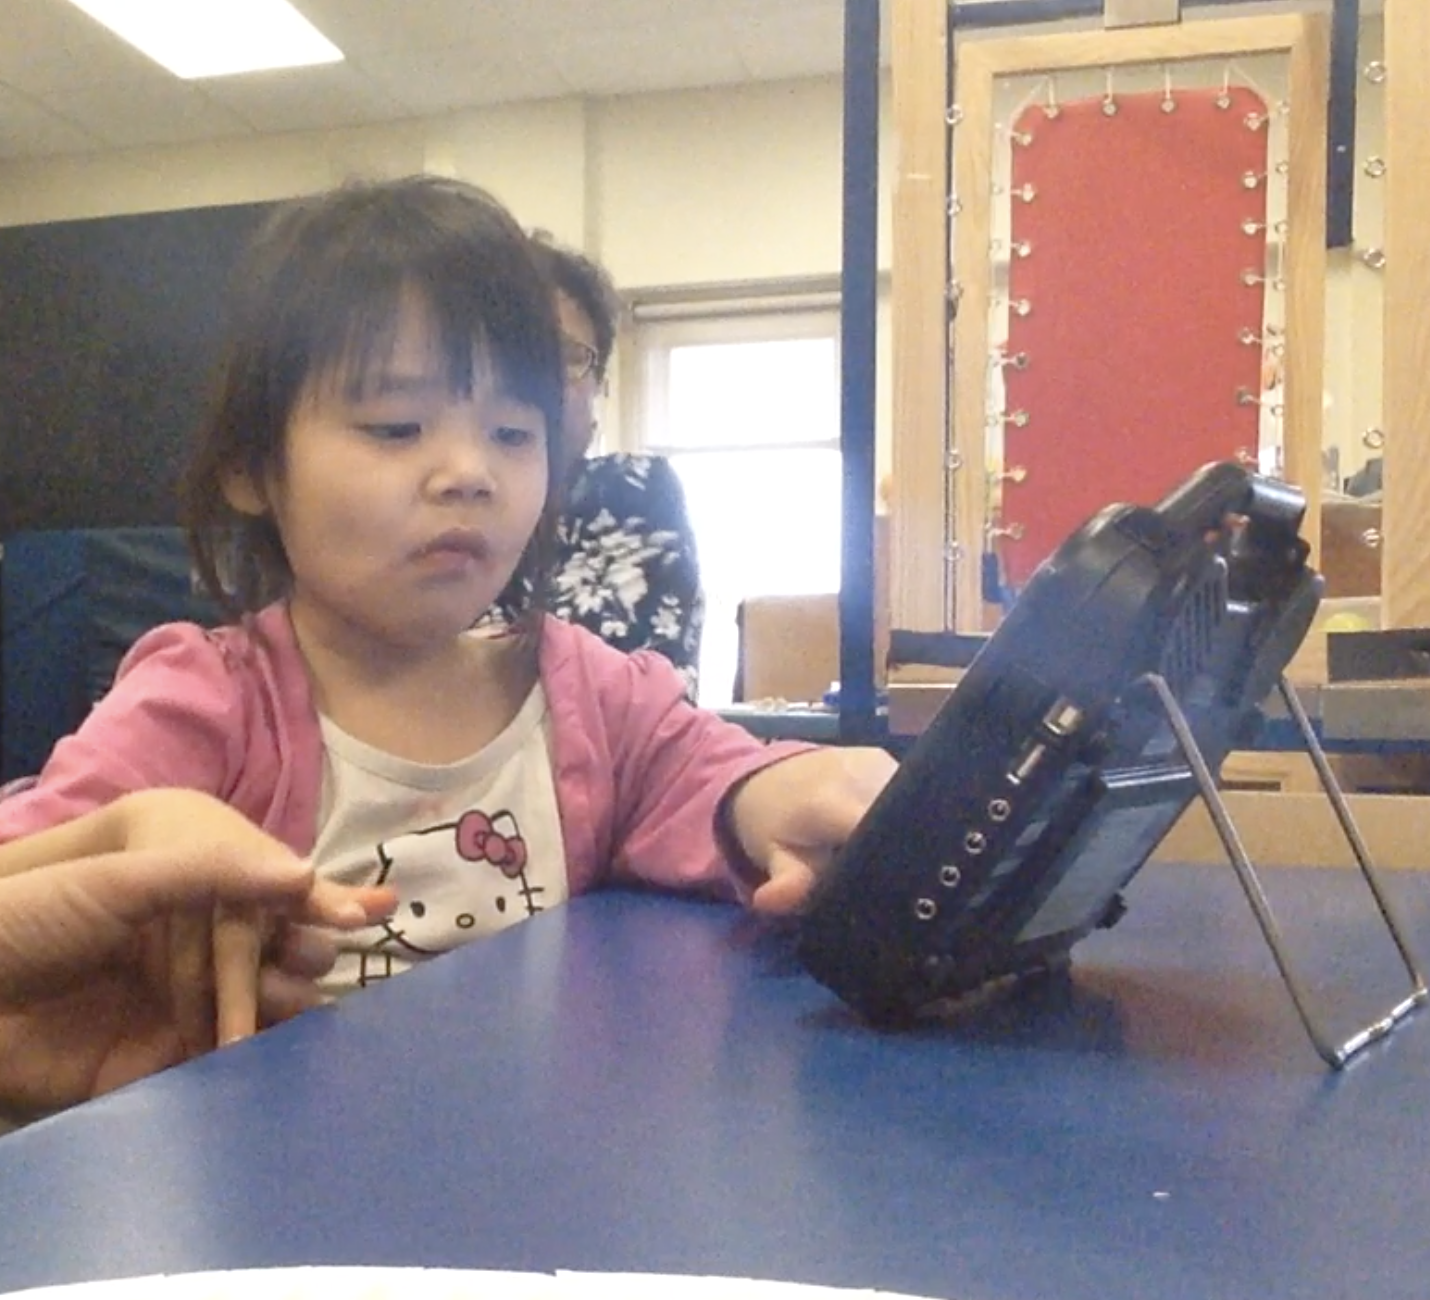 A young girl is learning how to communicate with an AAC device with the help of her teacher.